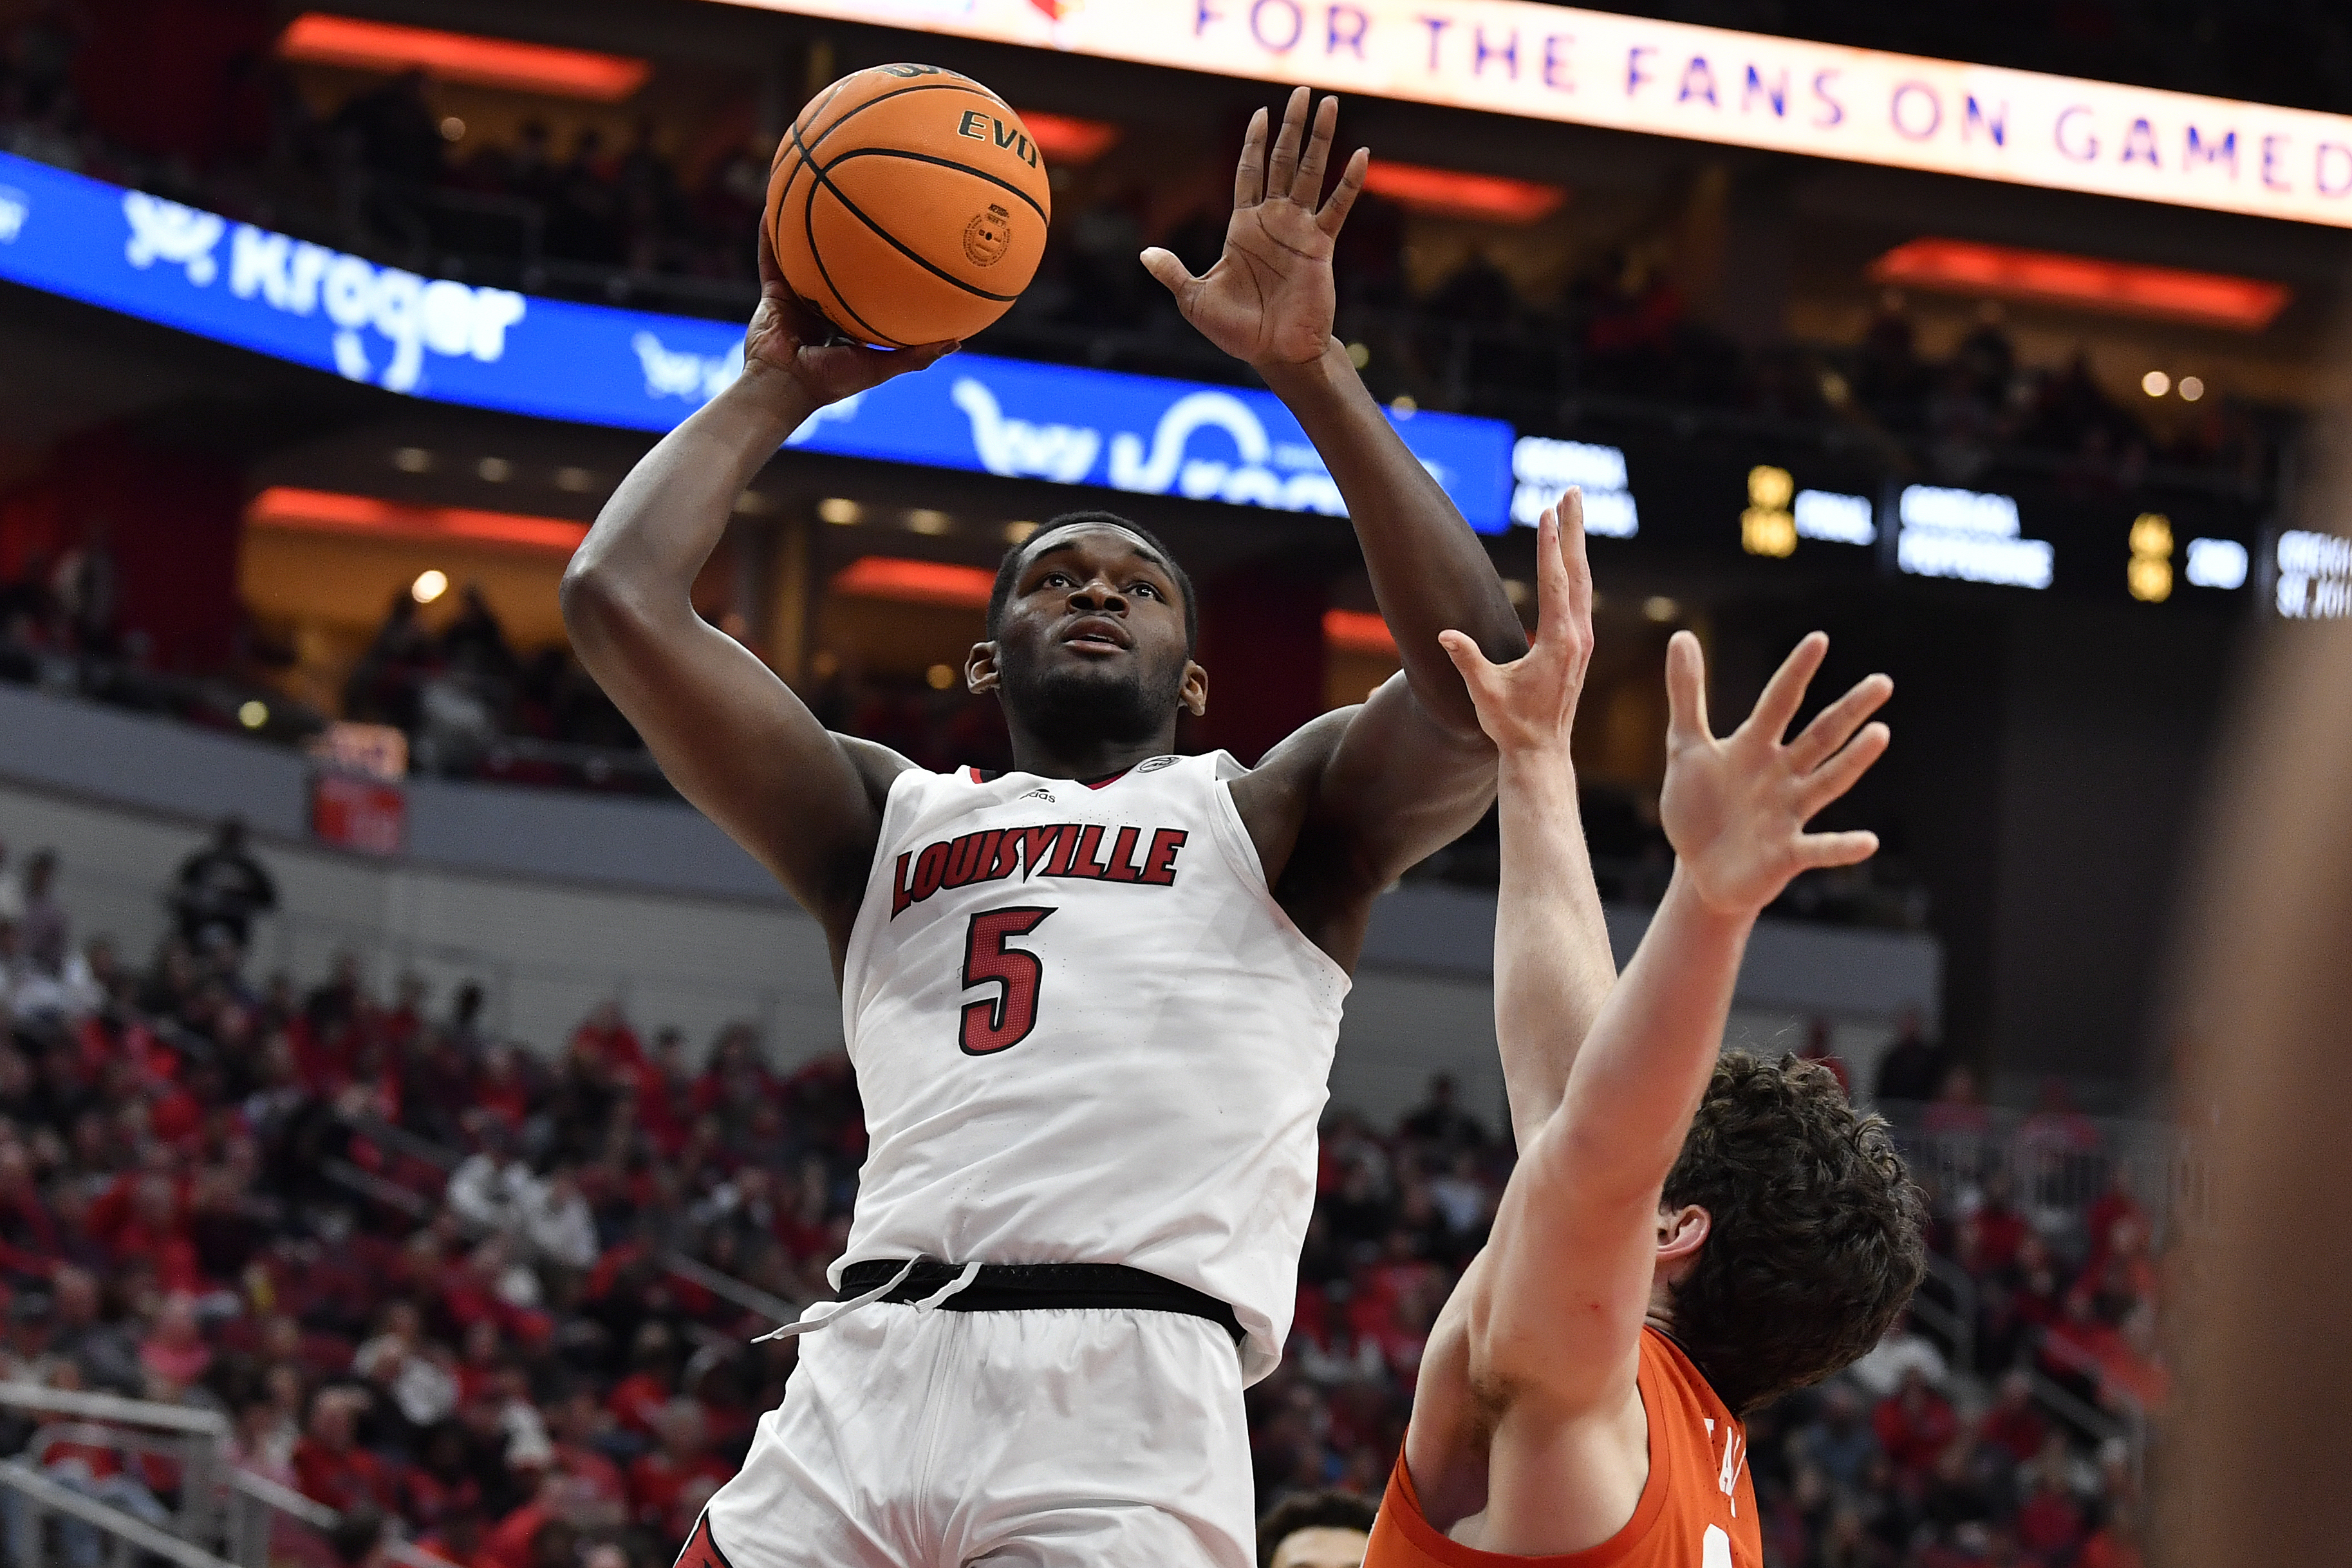 Louisville adds Emmanuel Okorafor to the roster